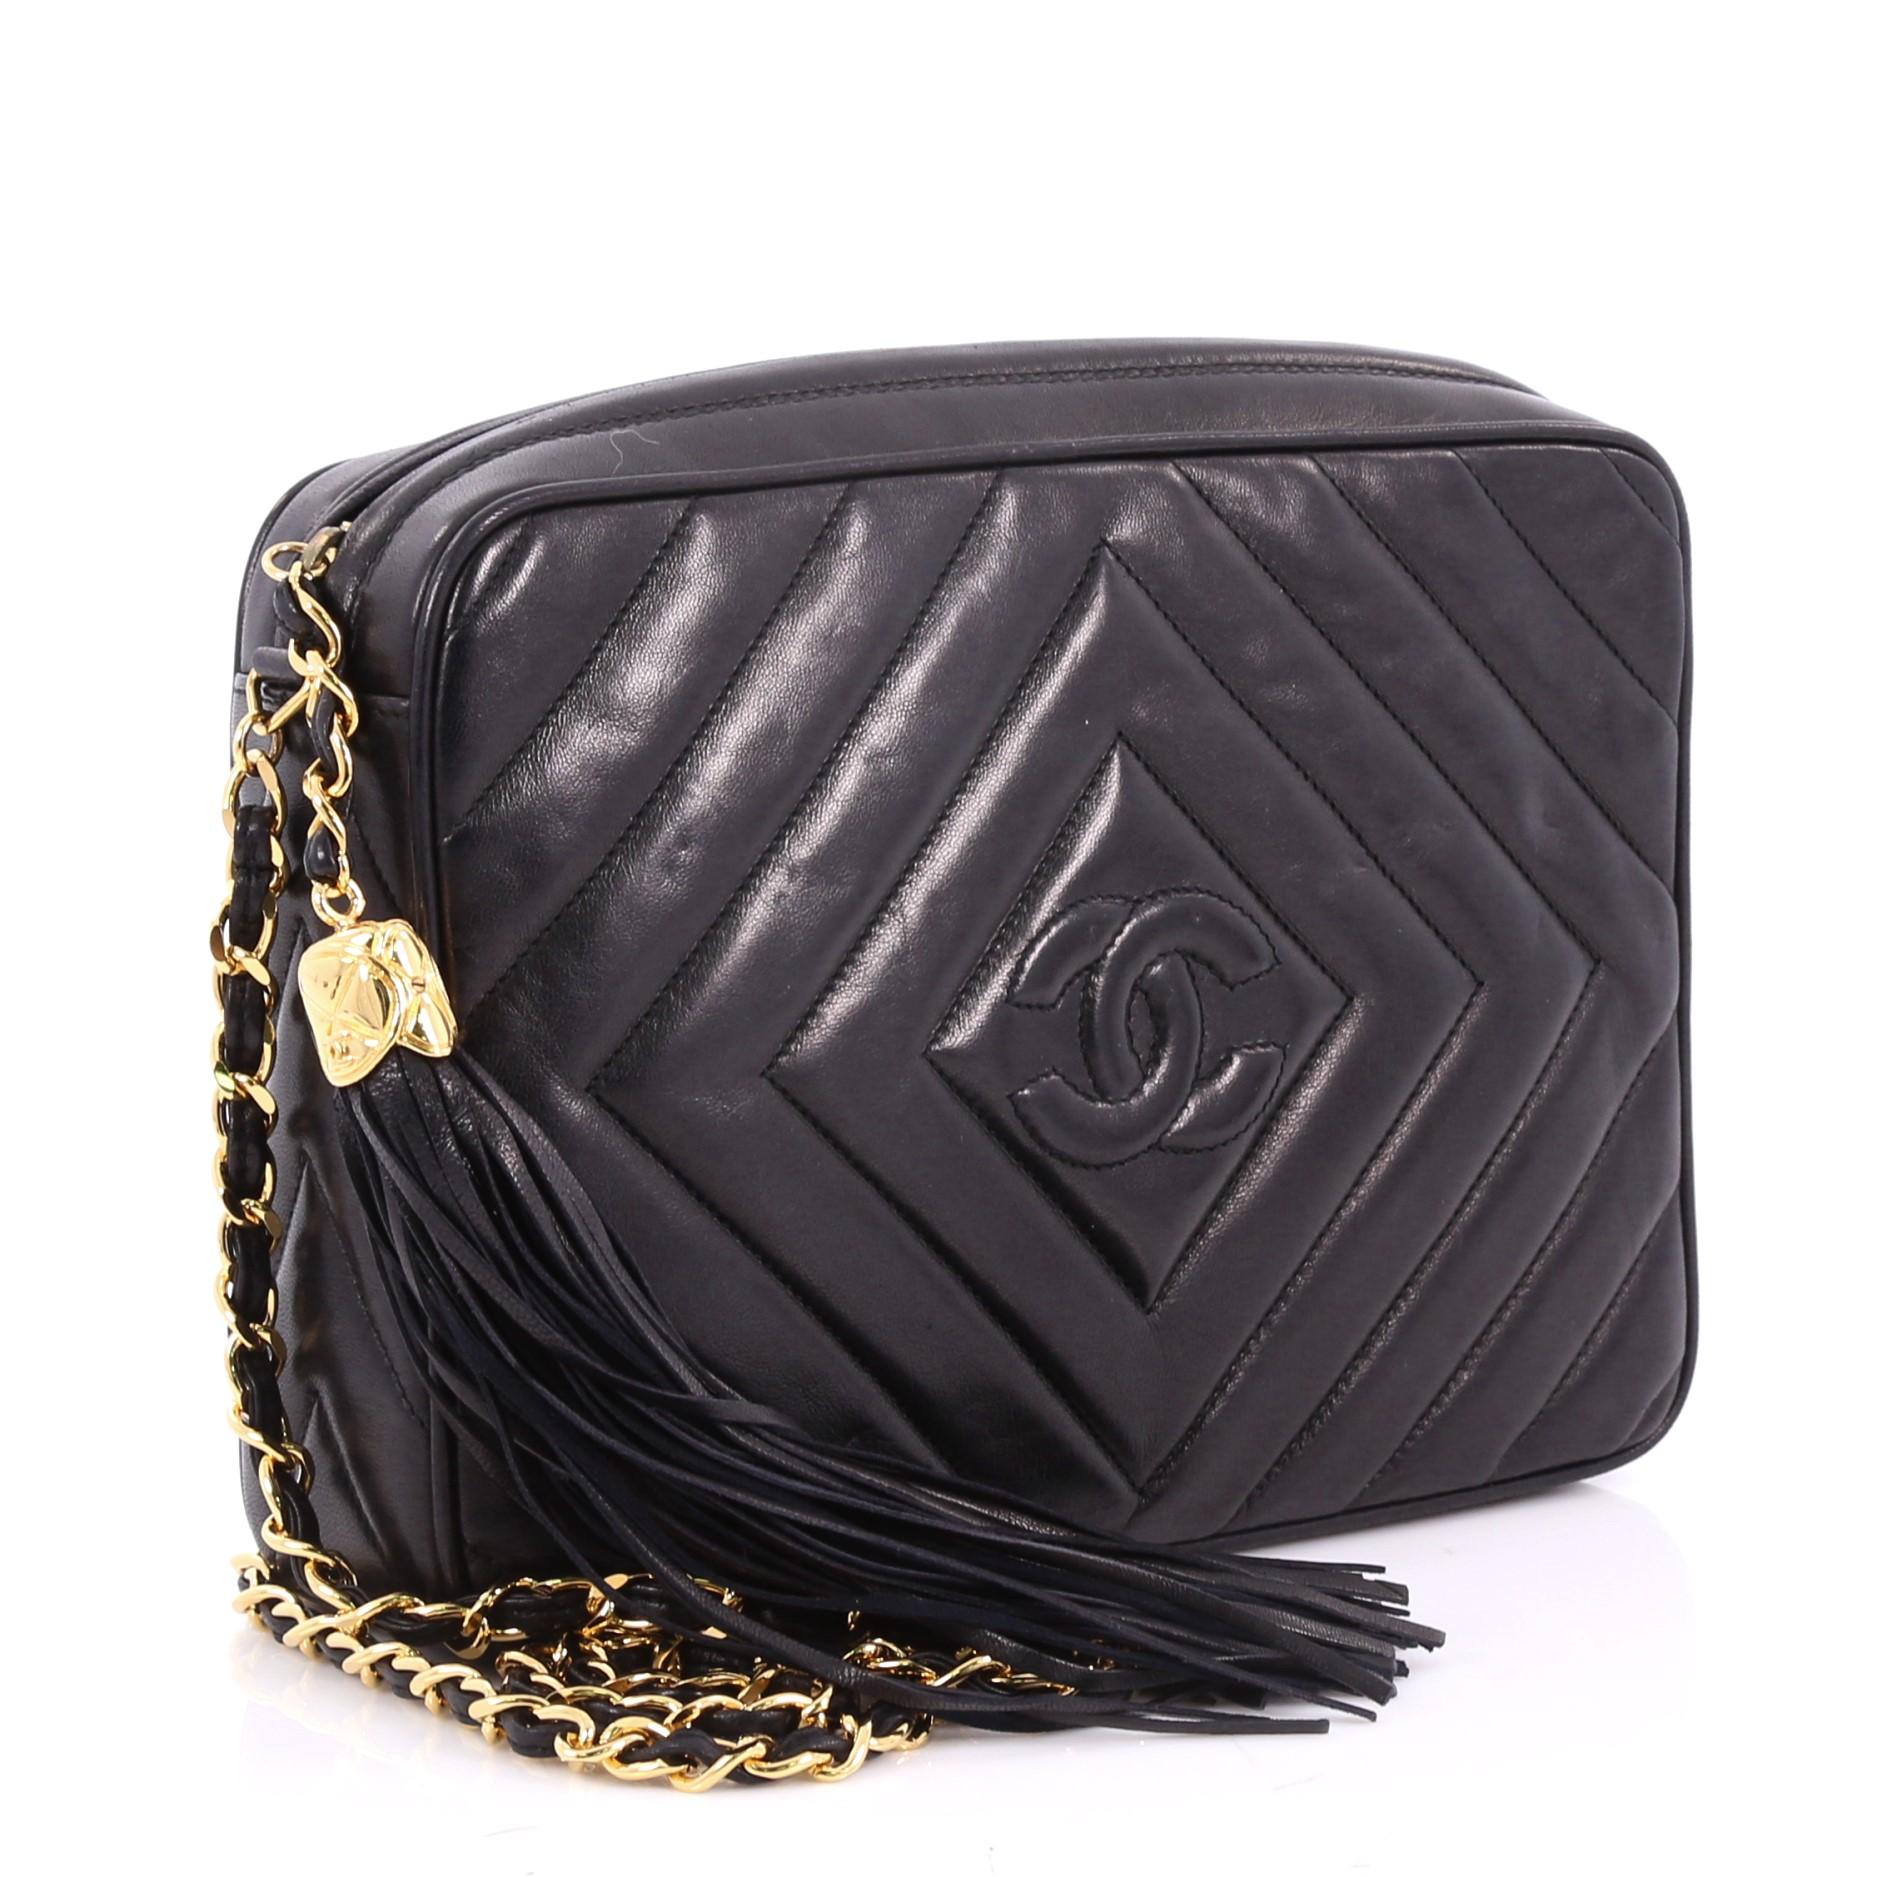 Black Chanel Vintage Chevron Camera Bag Quilted Leather Small